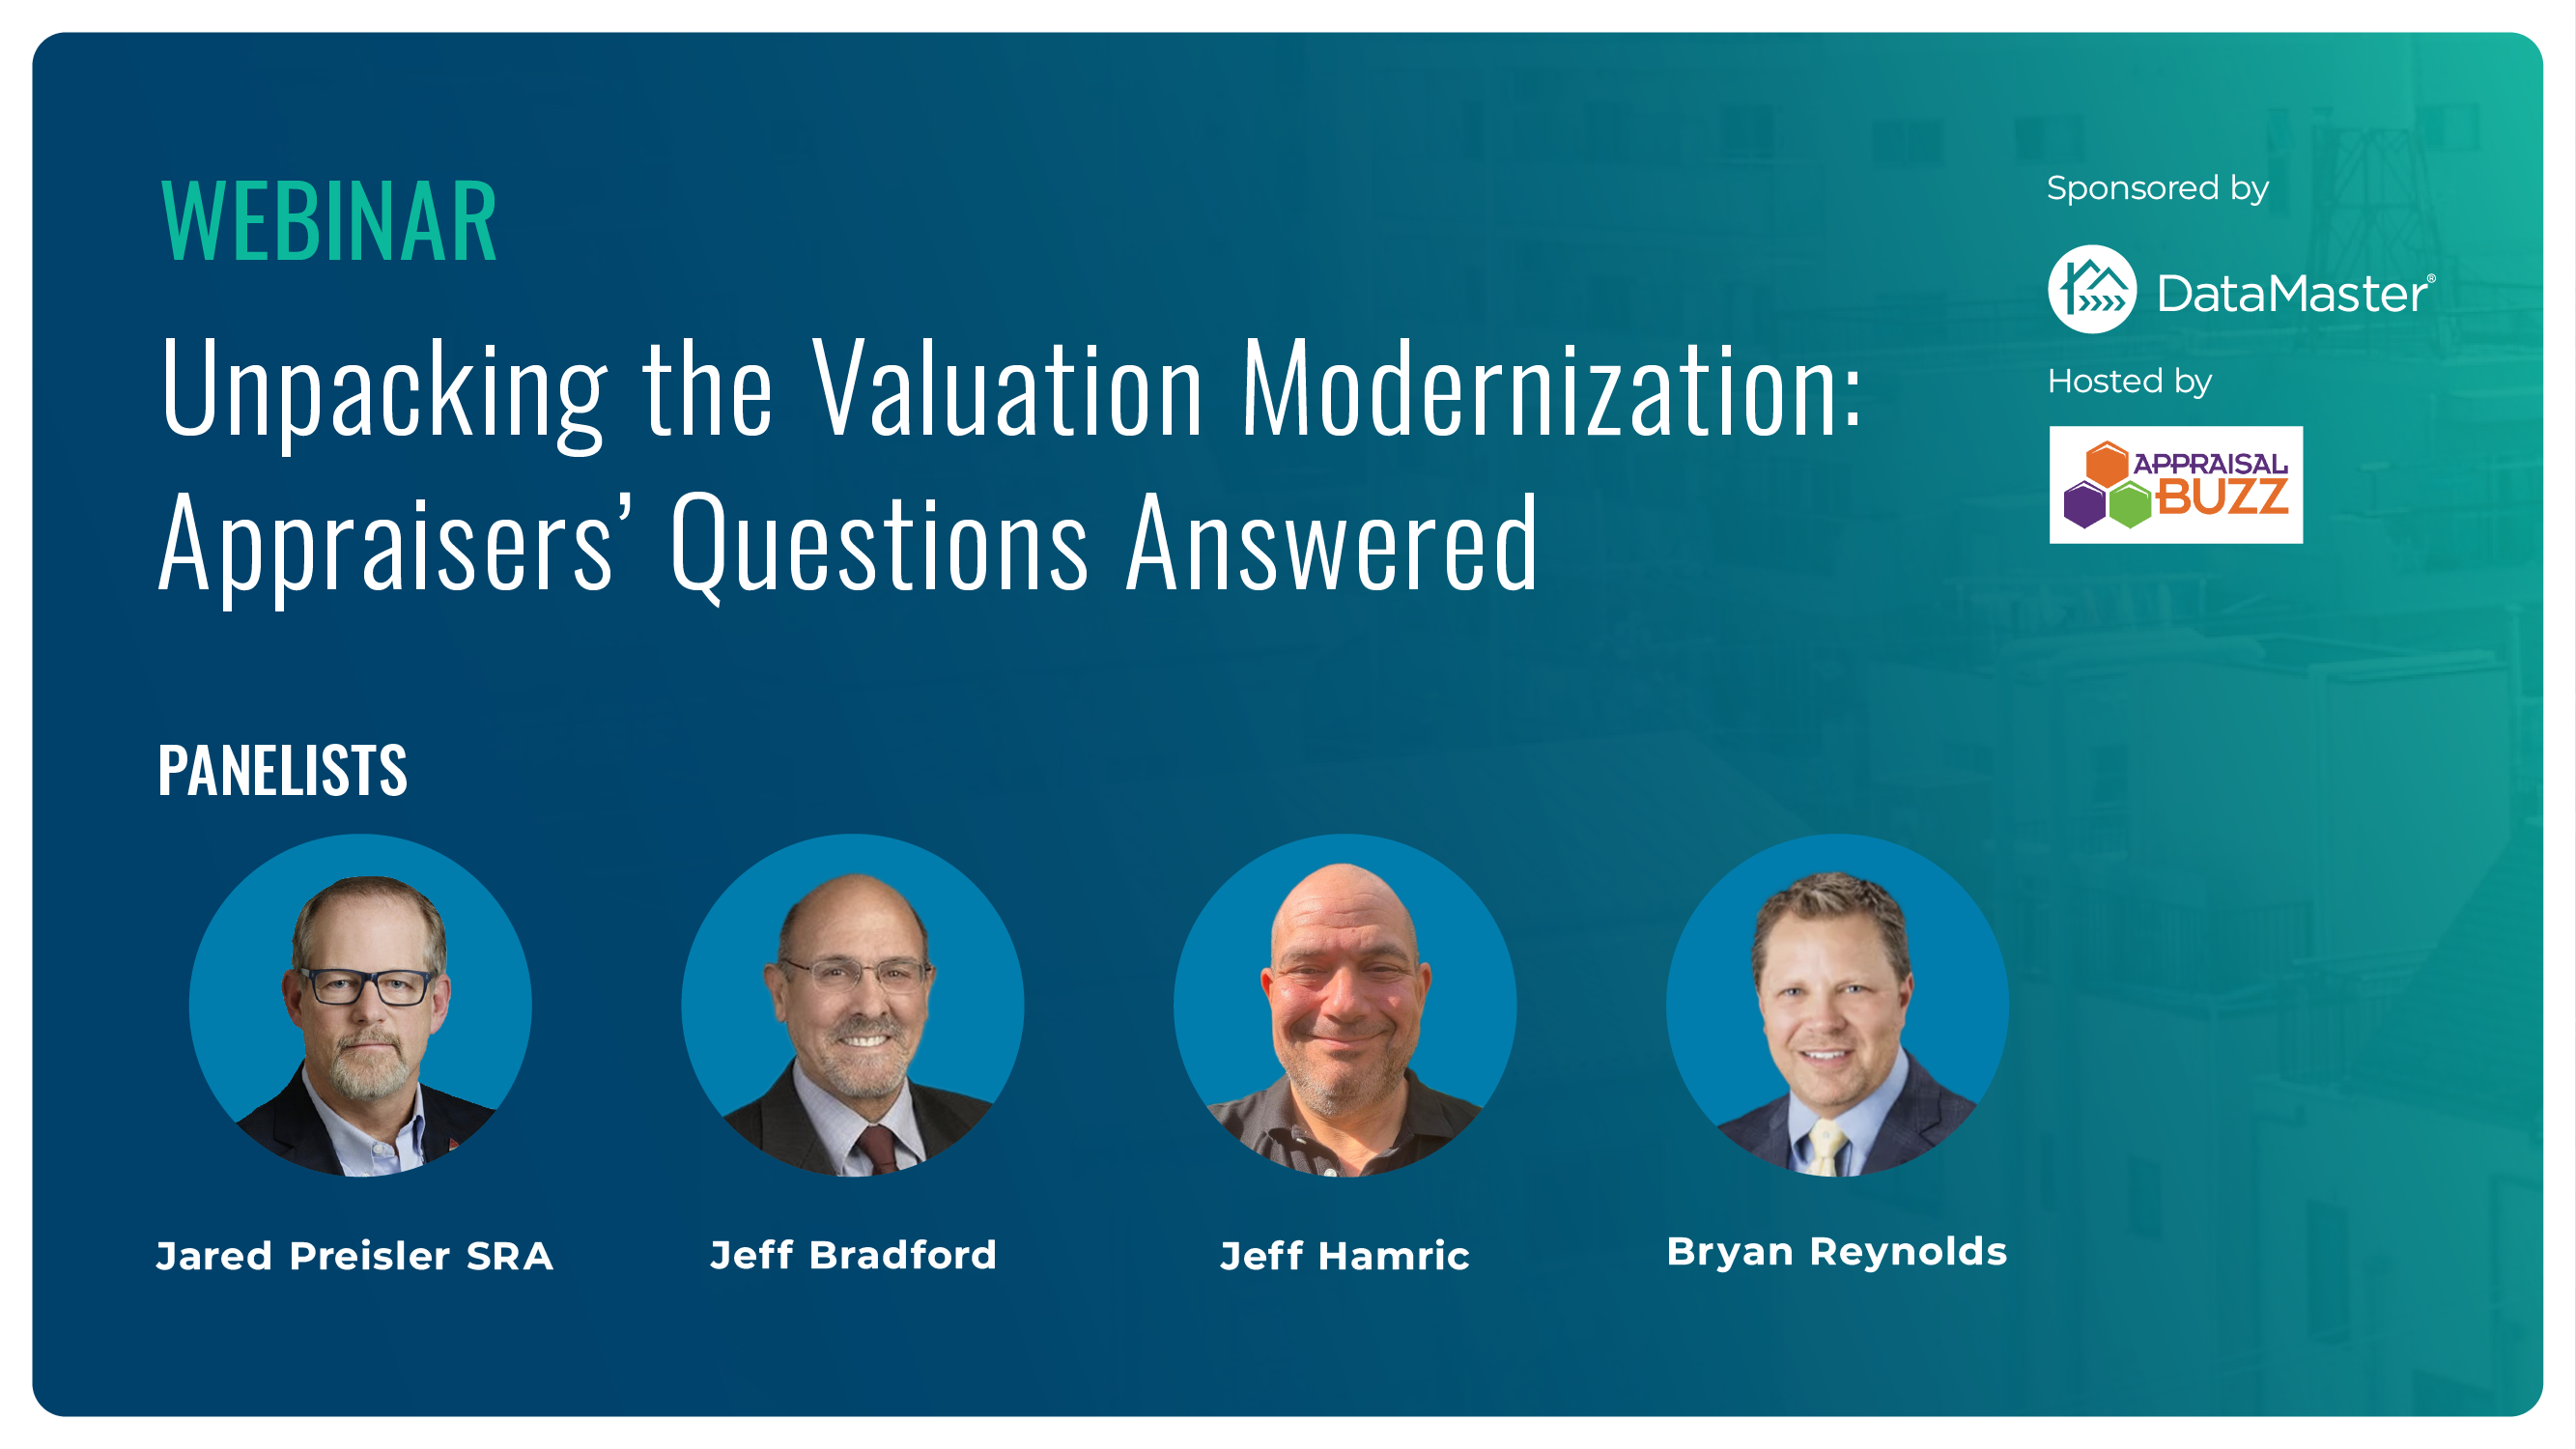 [WEBINAR] Unpacking the Valuation Modernization: Appraisers’ Questions Answered